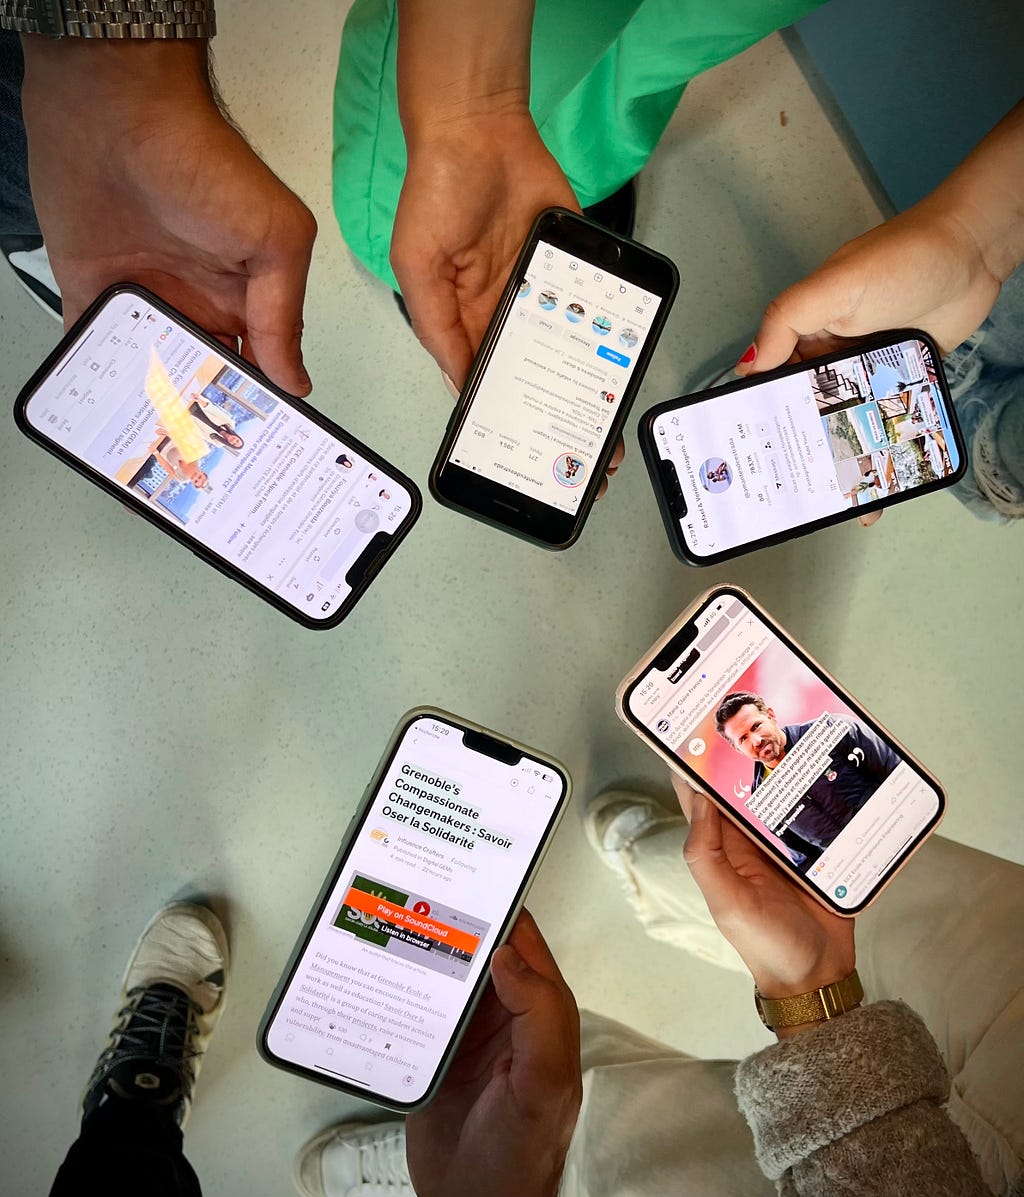 The picture shows five hands of GEM (Grenoble Ecole de Management) students holding their phone, and more precisely, their social media and social networks.